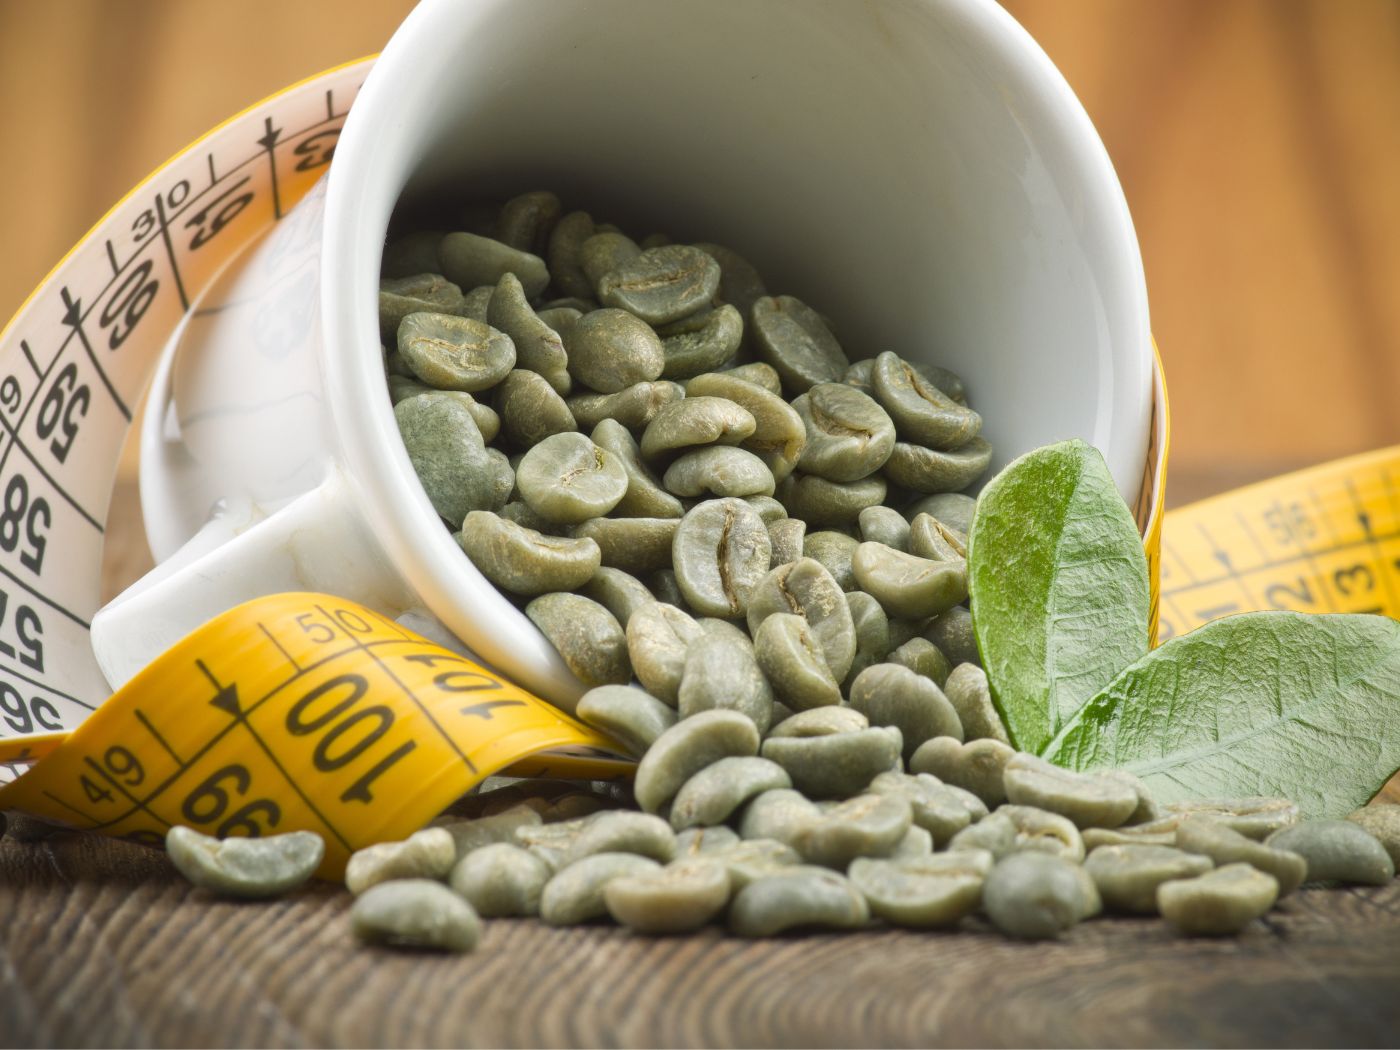 How Can Green Coffee Help You With Weight Loss?